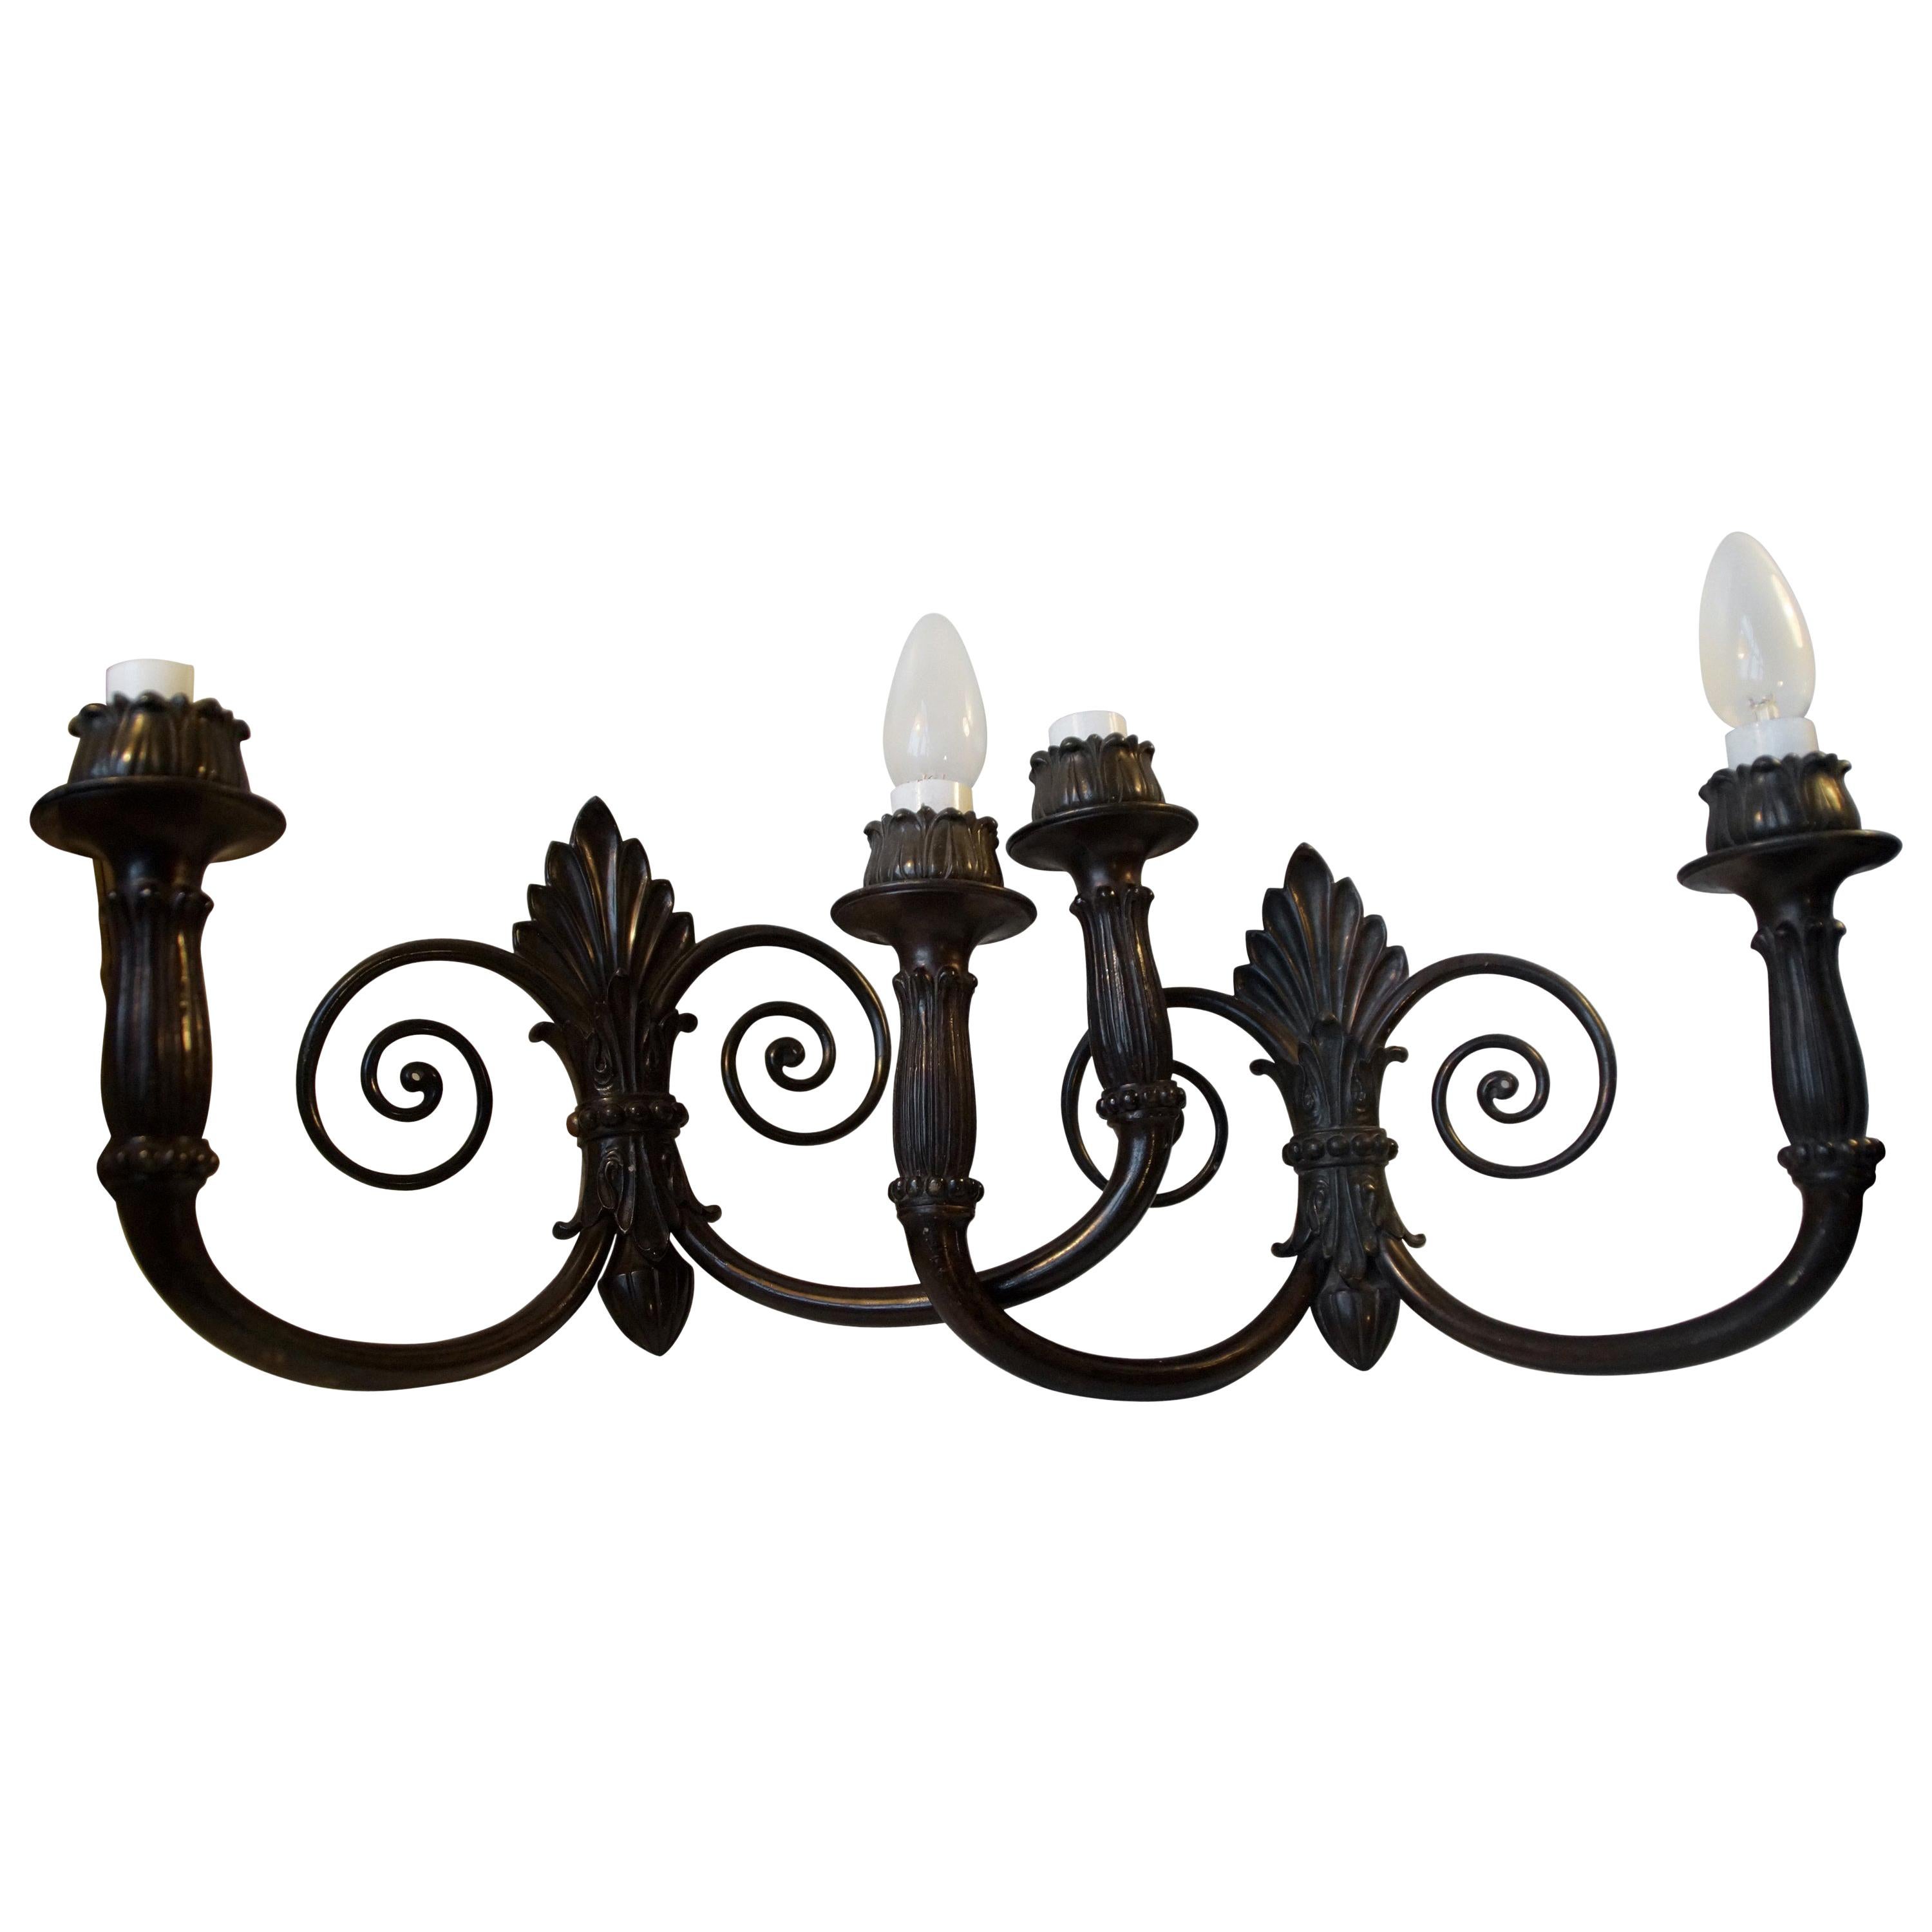 Antique French Esthetic Two-Armed Bronze Sconces with 'Swirl', 1900s